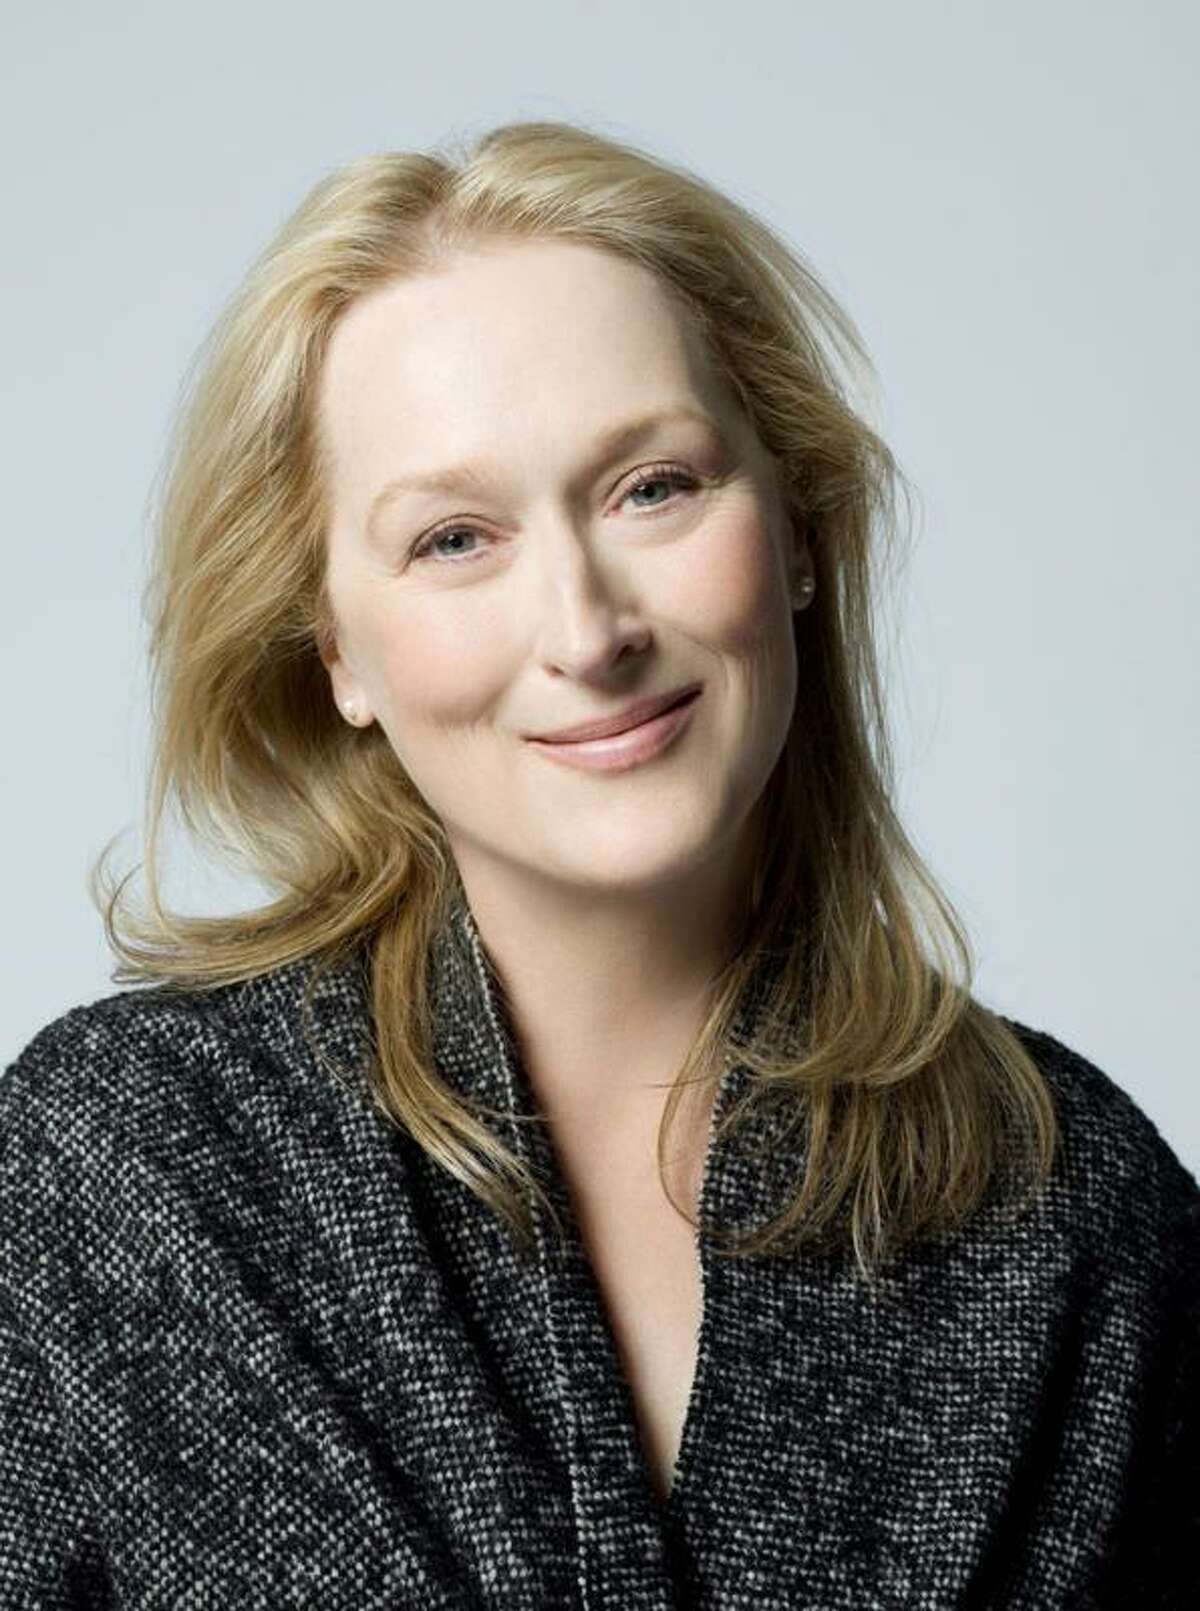 Actress Meryl Streep, who has a home in Litchfield County, will speak in the Kent Memorial Library's spring lecture series. Photo courtesy of the library.